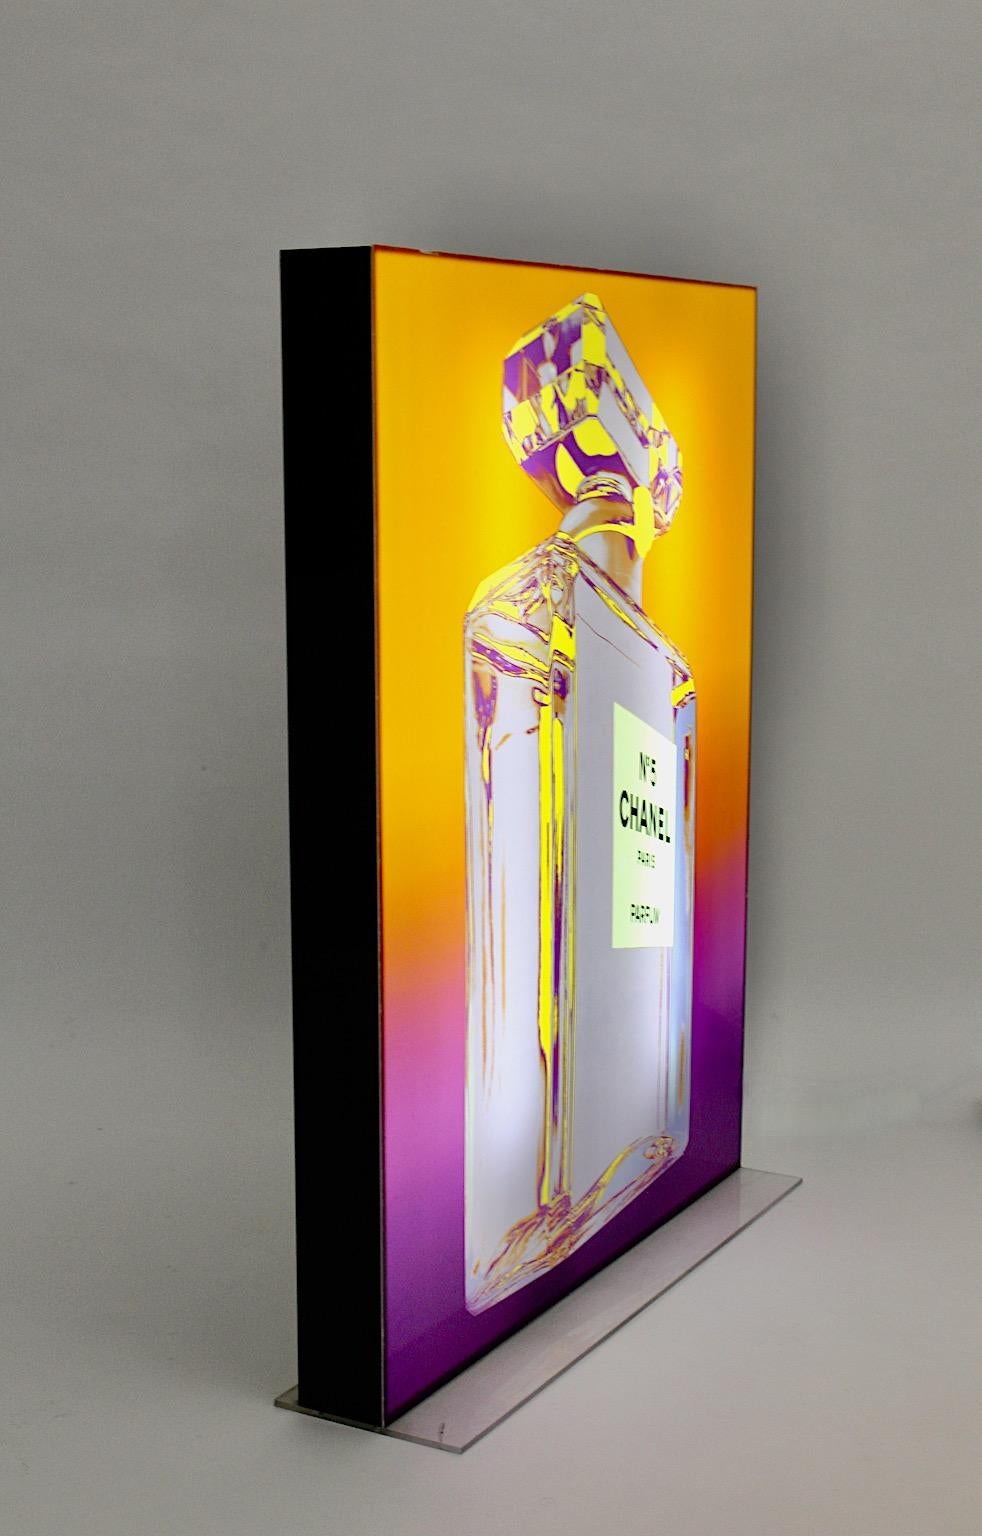 Pop Art Chanel No. 5 Vintage Advertising Lighting Display after Andy Warhol 1999 In Good Condition For Sale In Vienna, AT